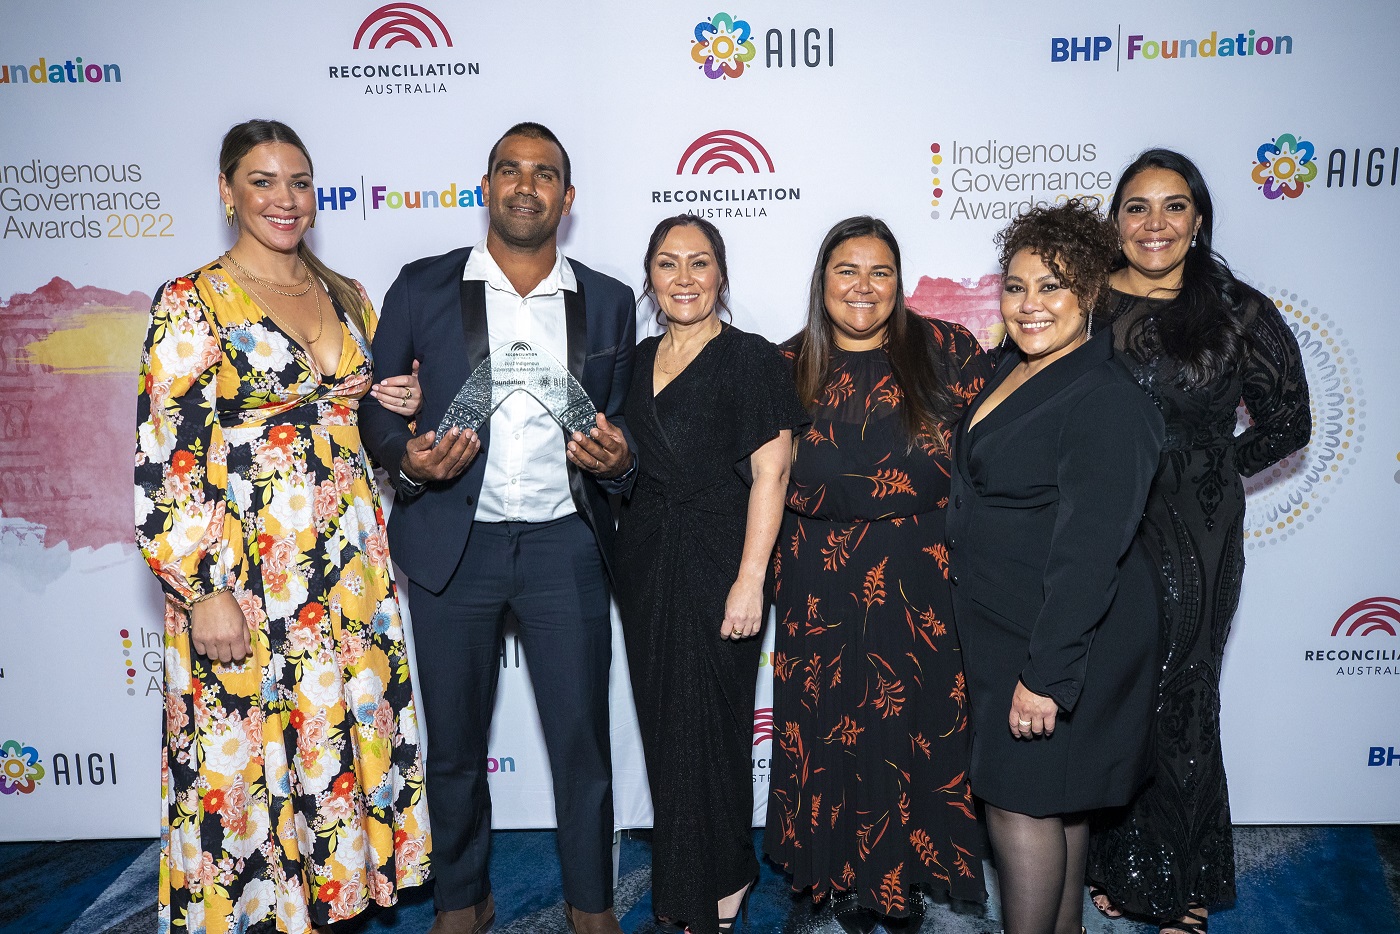 A group of people in formalwear stands in front of a backdrop with Reconciliation Australia, Indigenous Governance Awards, AIGI and BHP Foundation logos on it